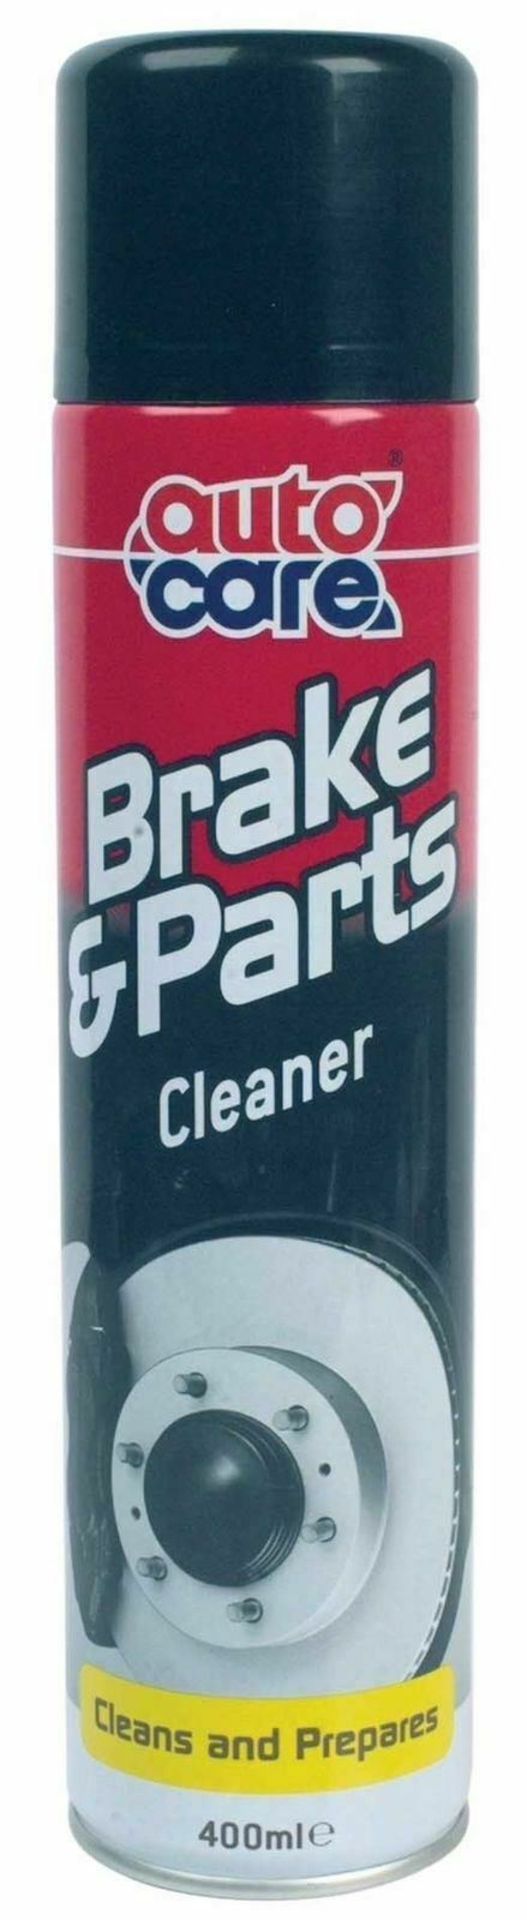 72 X NEW Autocare Brake and Parts Cleaner Aerosol 400ml (ROW4)